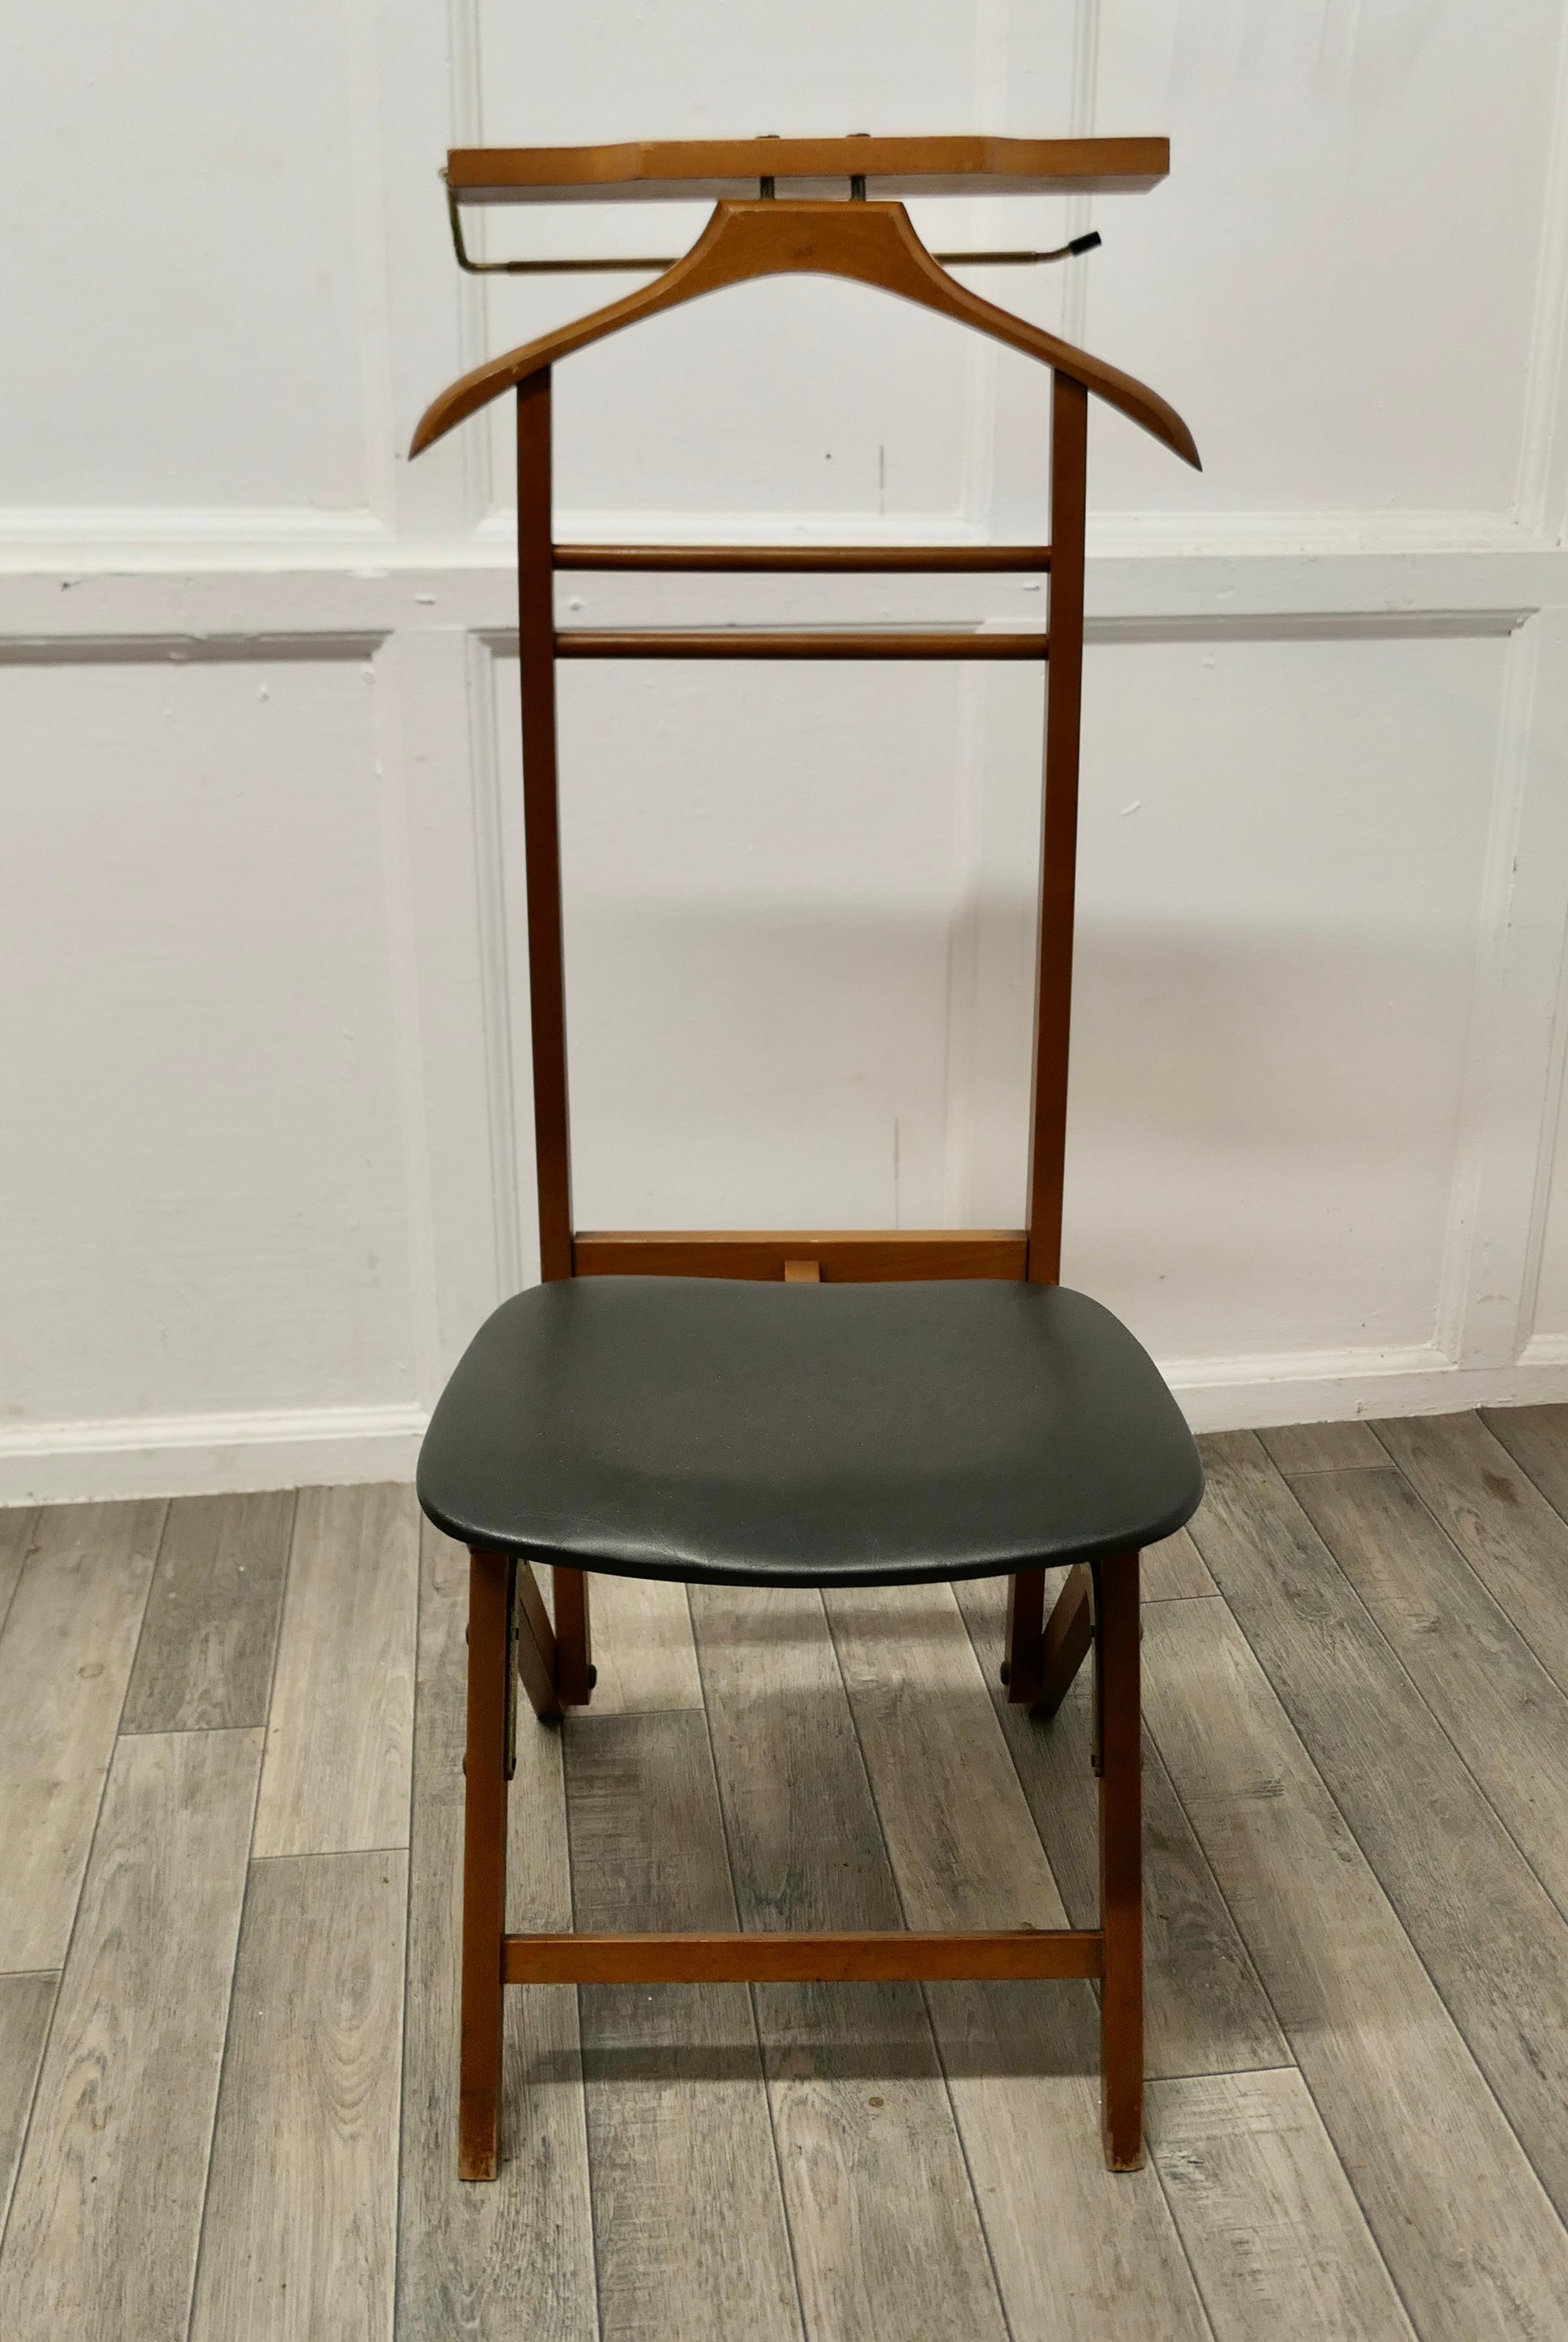 Midcentury Beech and Vinyl Gentleman's Valet Seat, Formax Valet by Breveitato In Good Condition For Sale In Chillerton, Isle of Wight